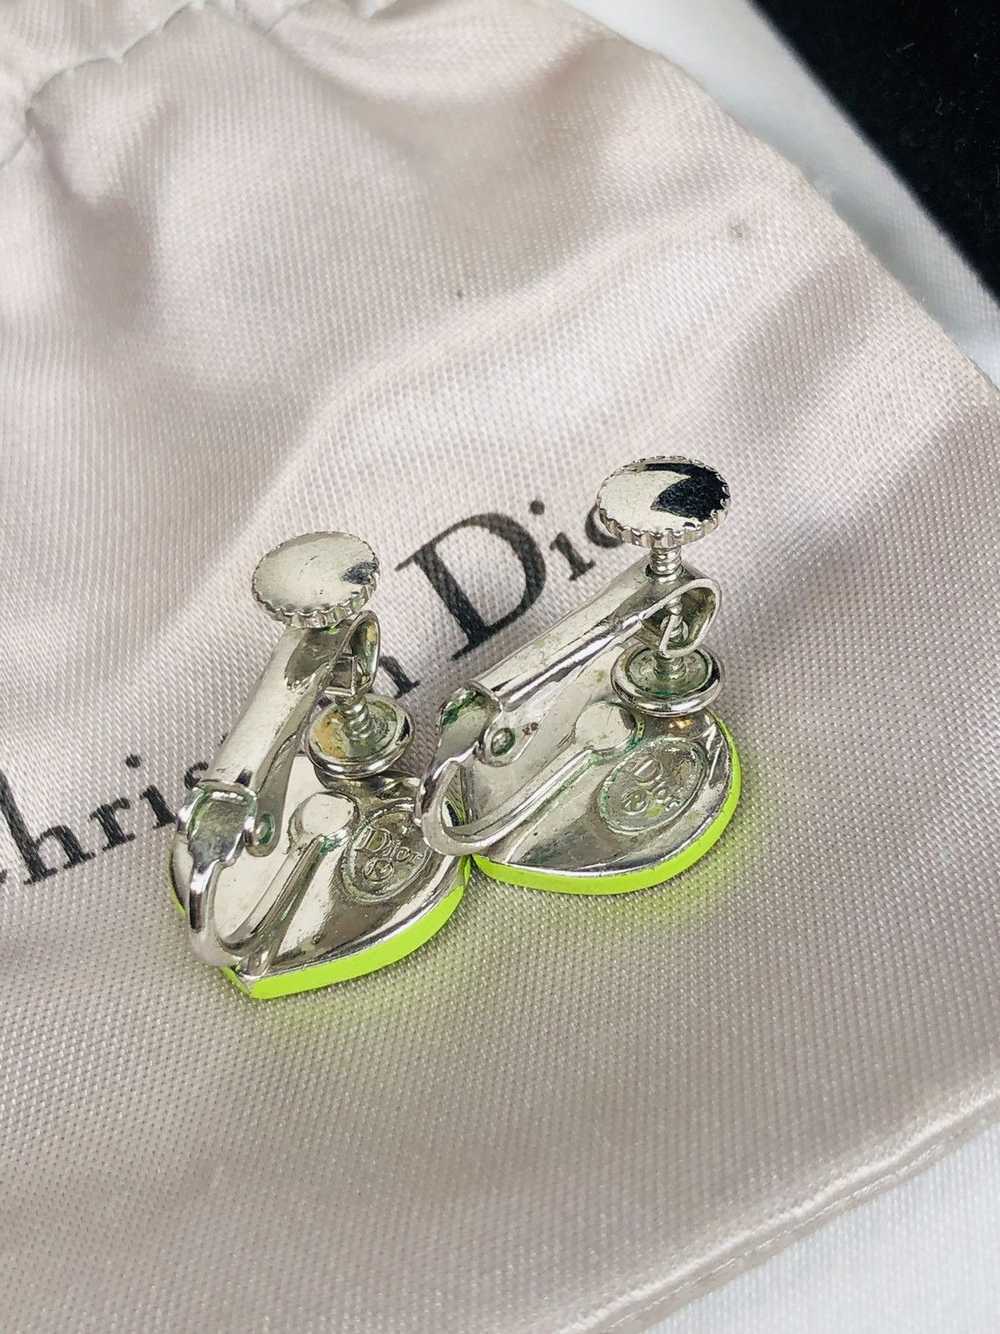 Dior Dior clip on heart earrings - image 3